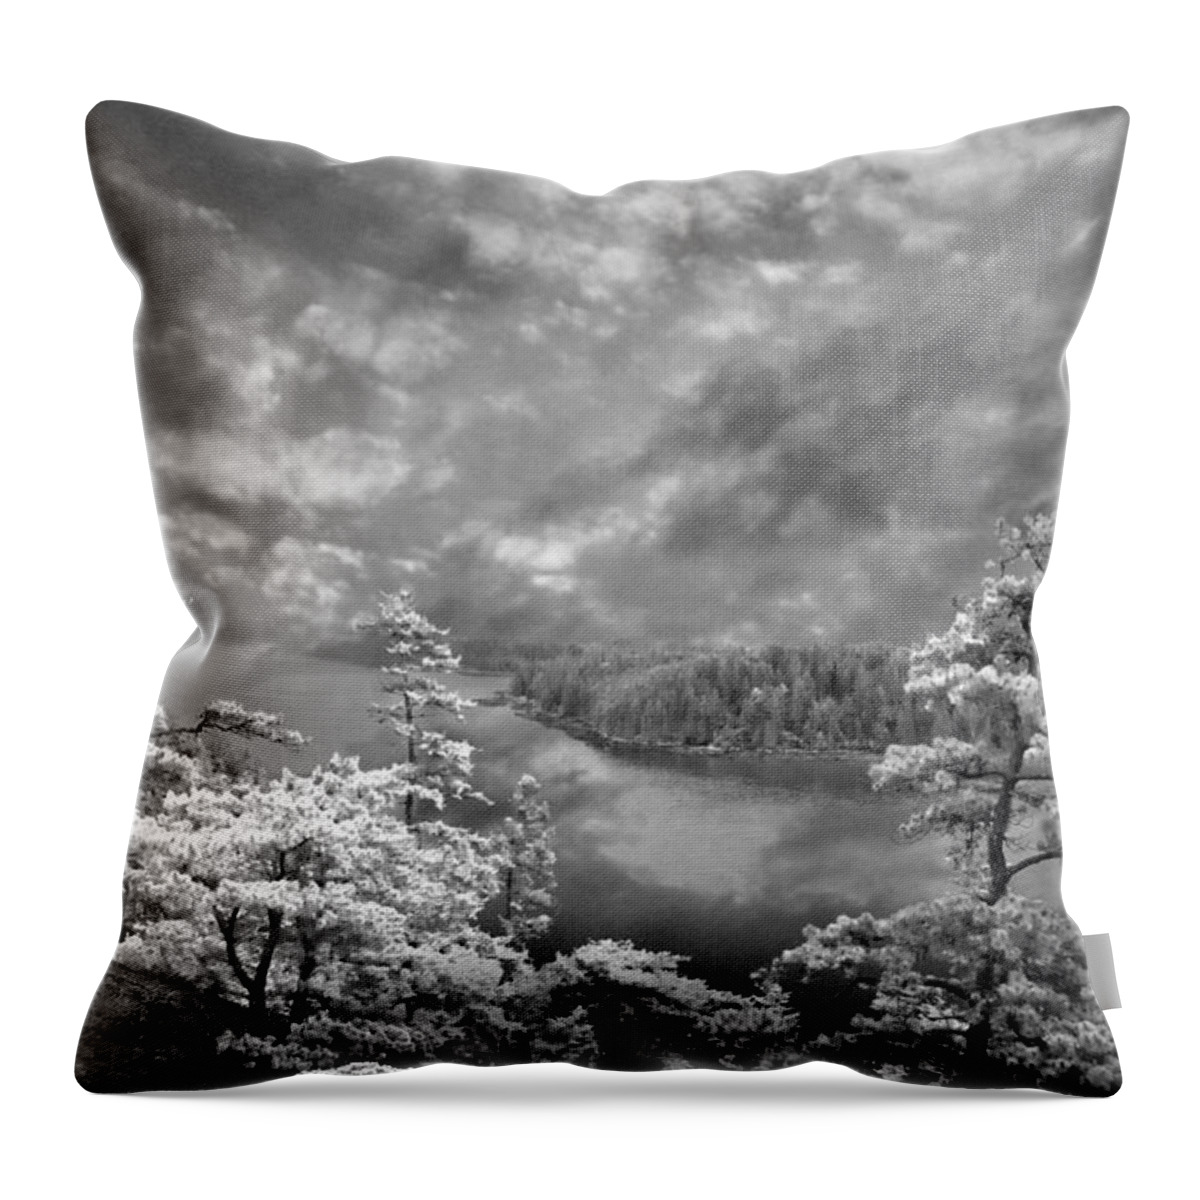 Top Of Tip Toe Mountain Throw Pillow featuring the photograph Top of Tip Toe Mountain, Vinalhaven, Maine by Michele A Loftus